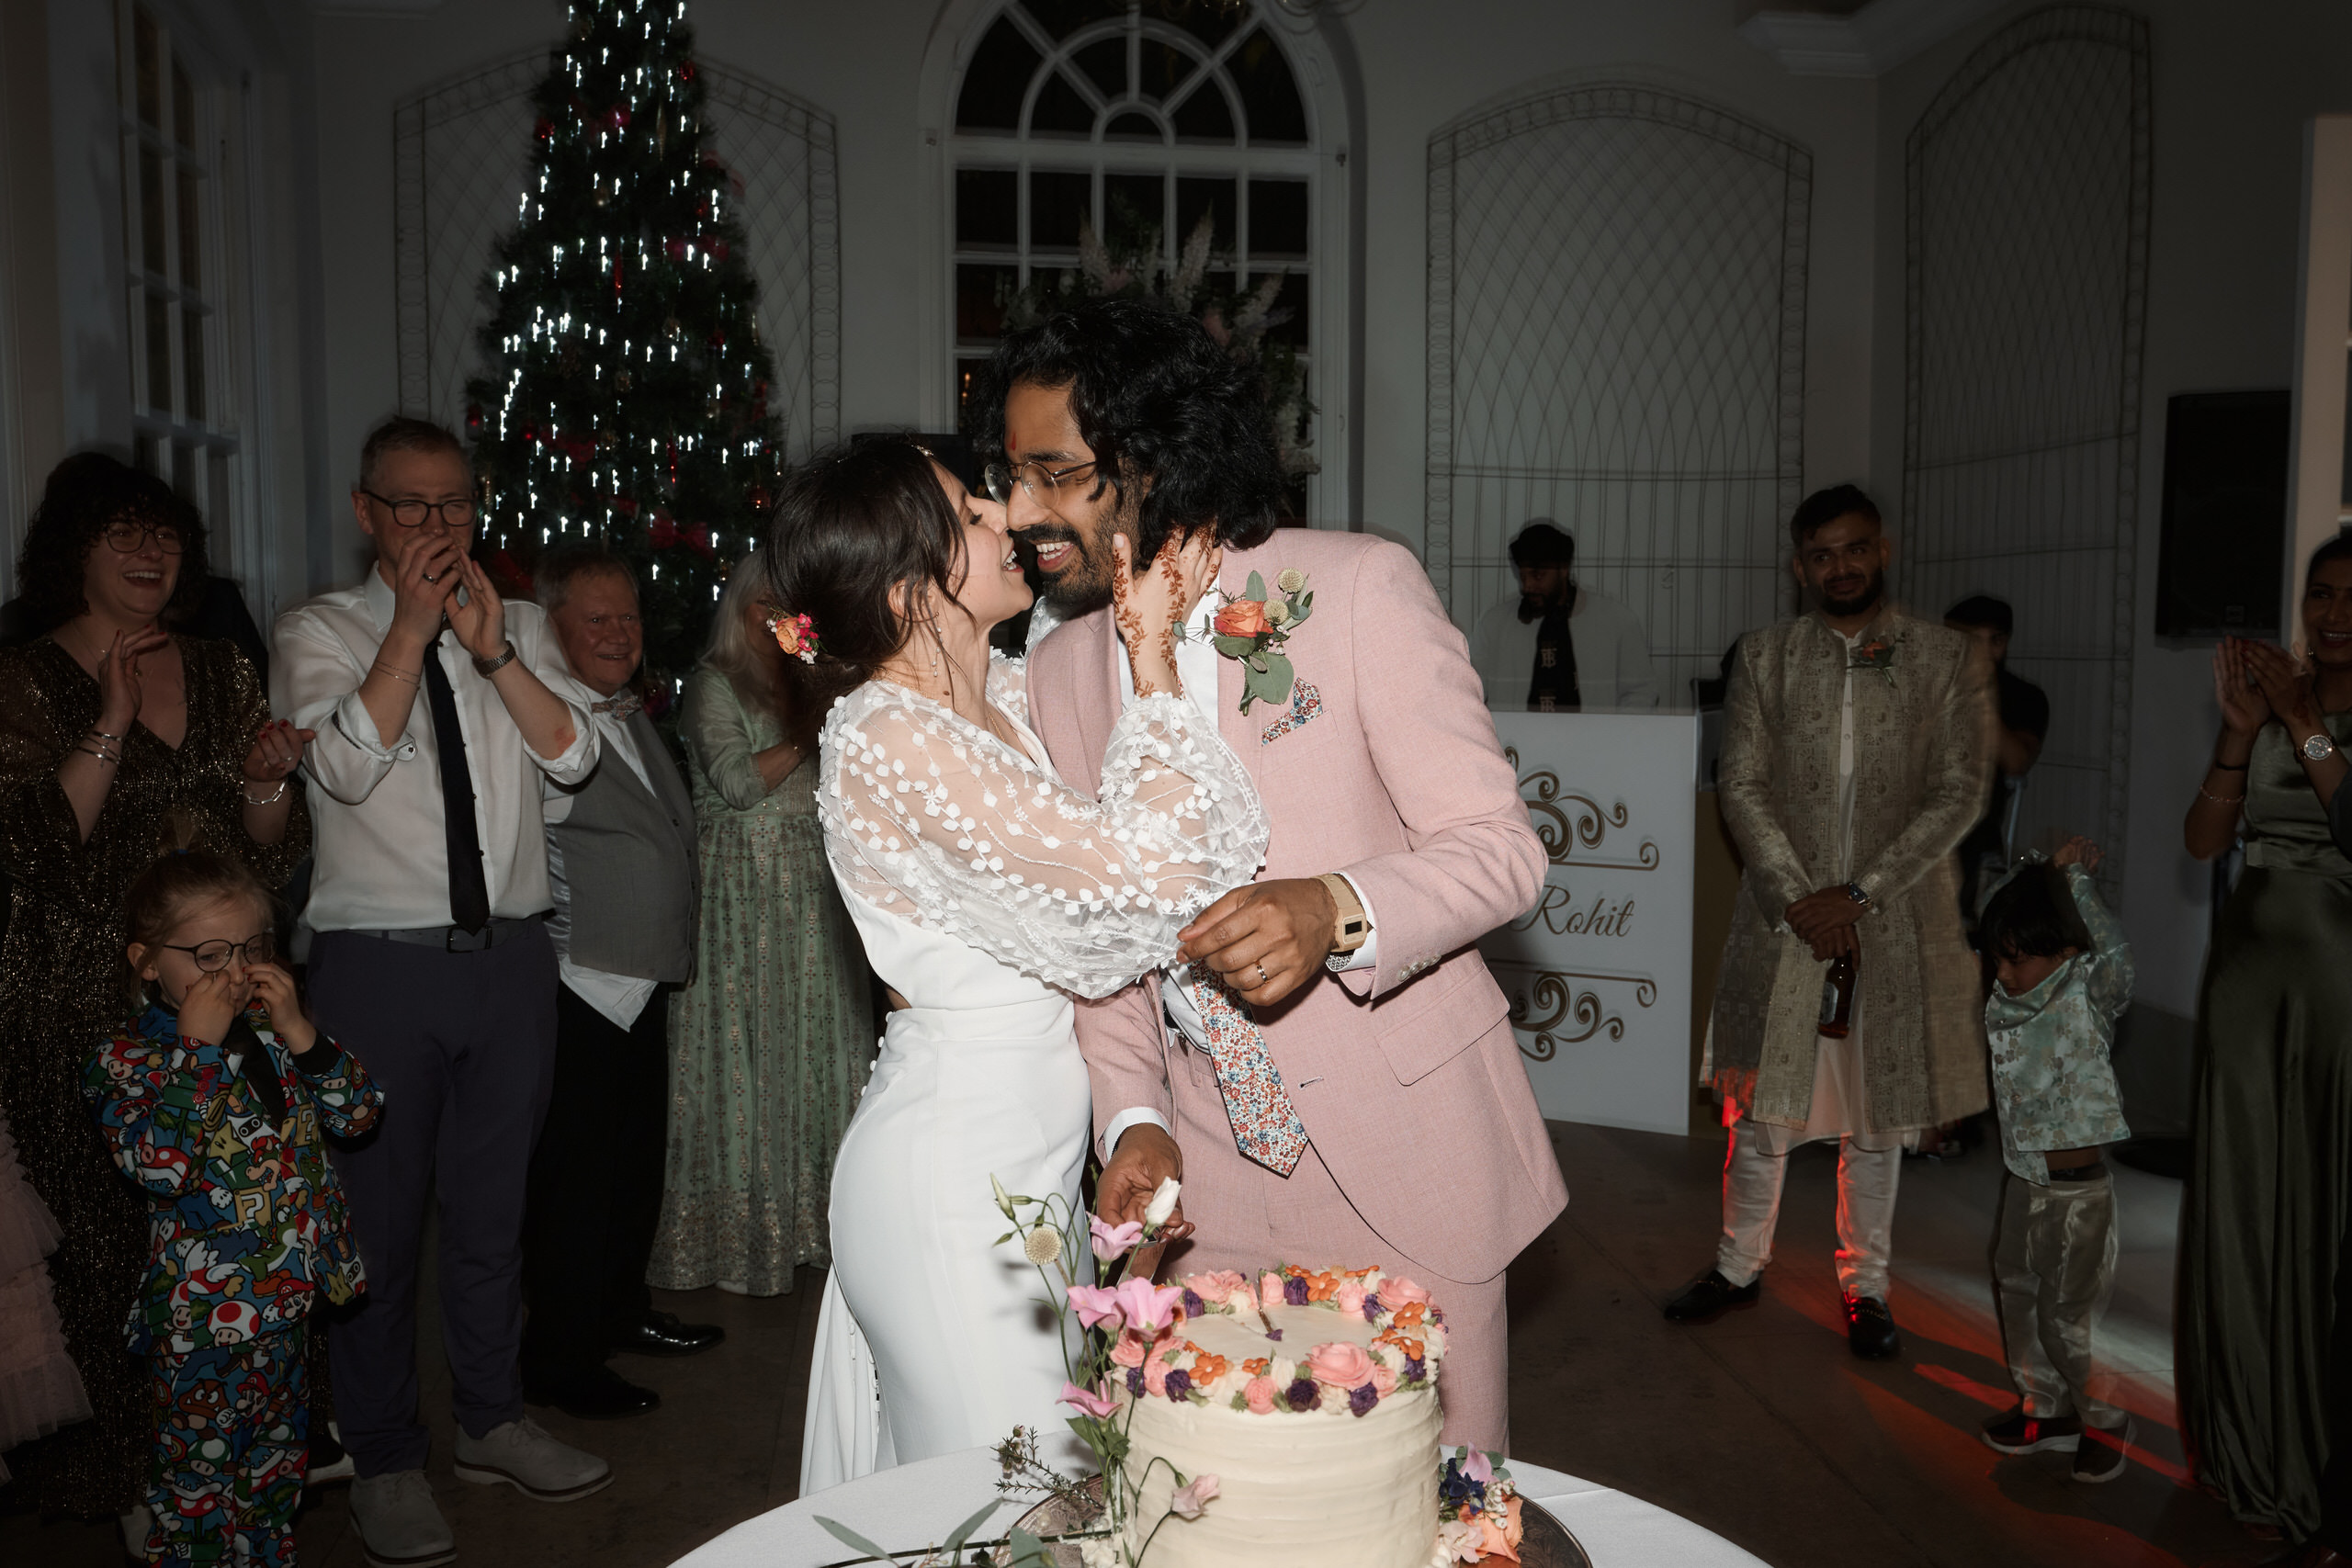 A couple getting married is kissing in front of their wedding cake.